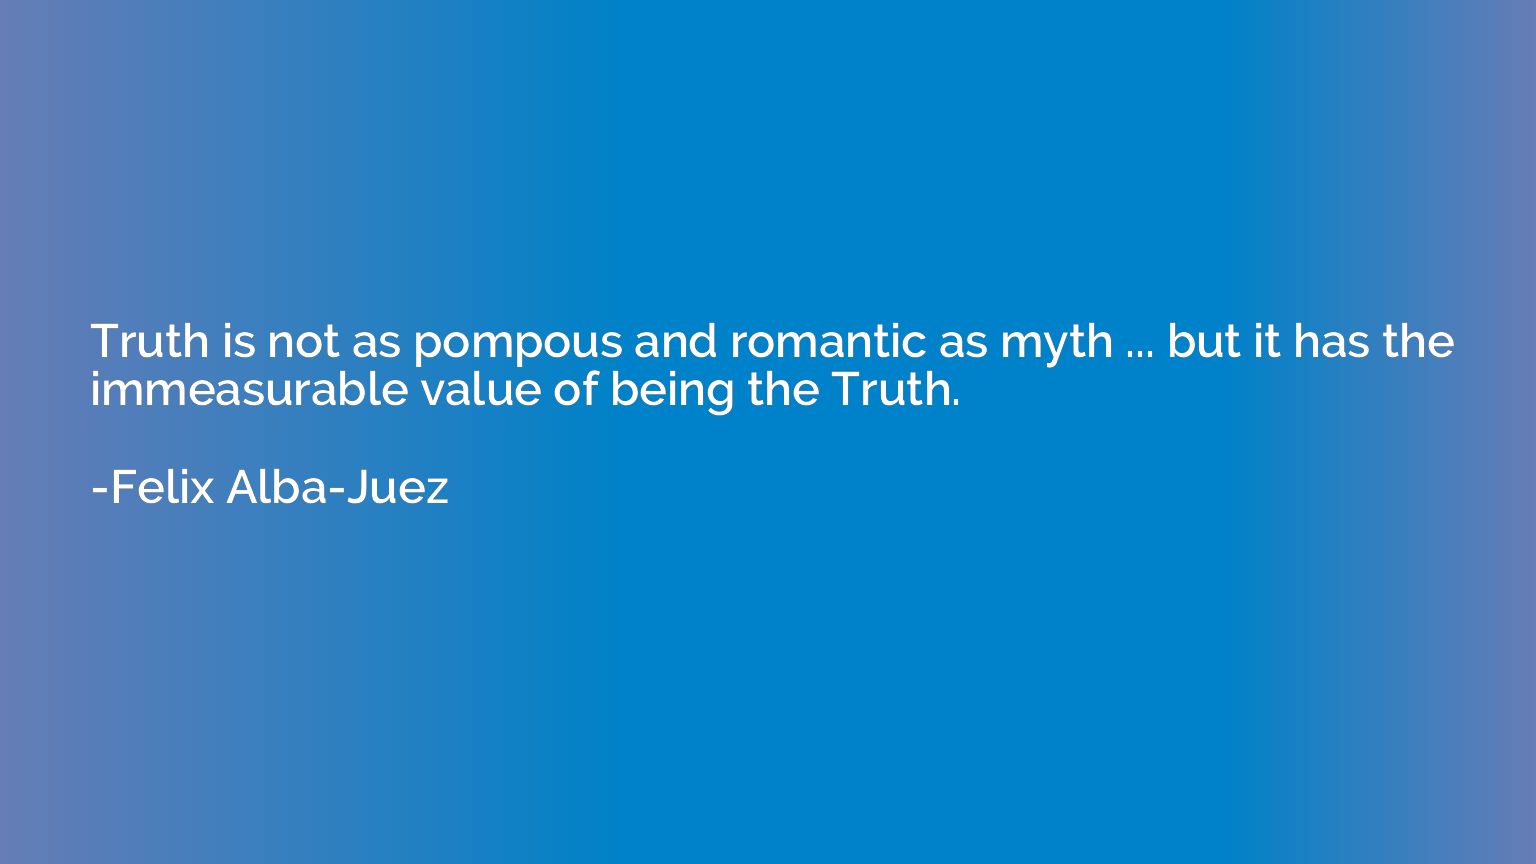 Truth is not as pompous and romantic as myth ... but it has 